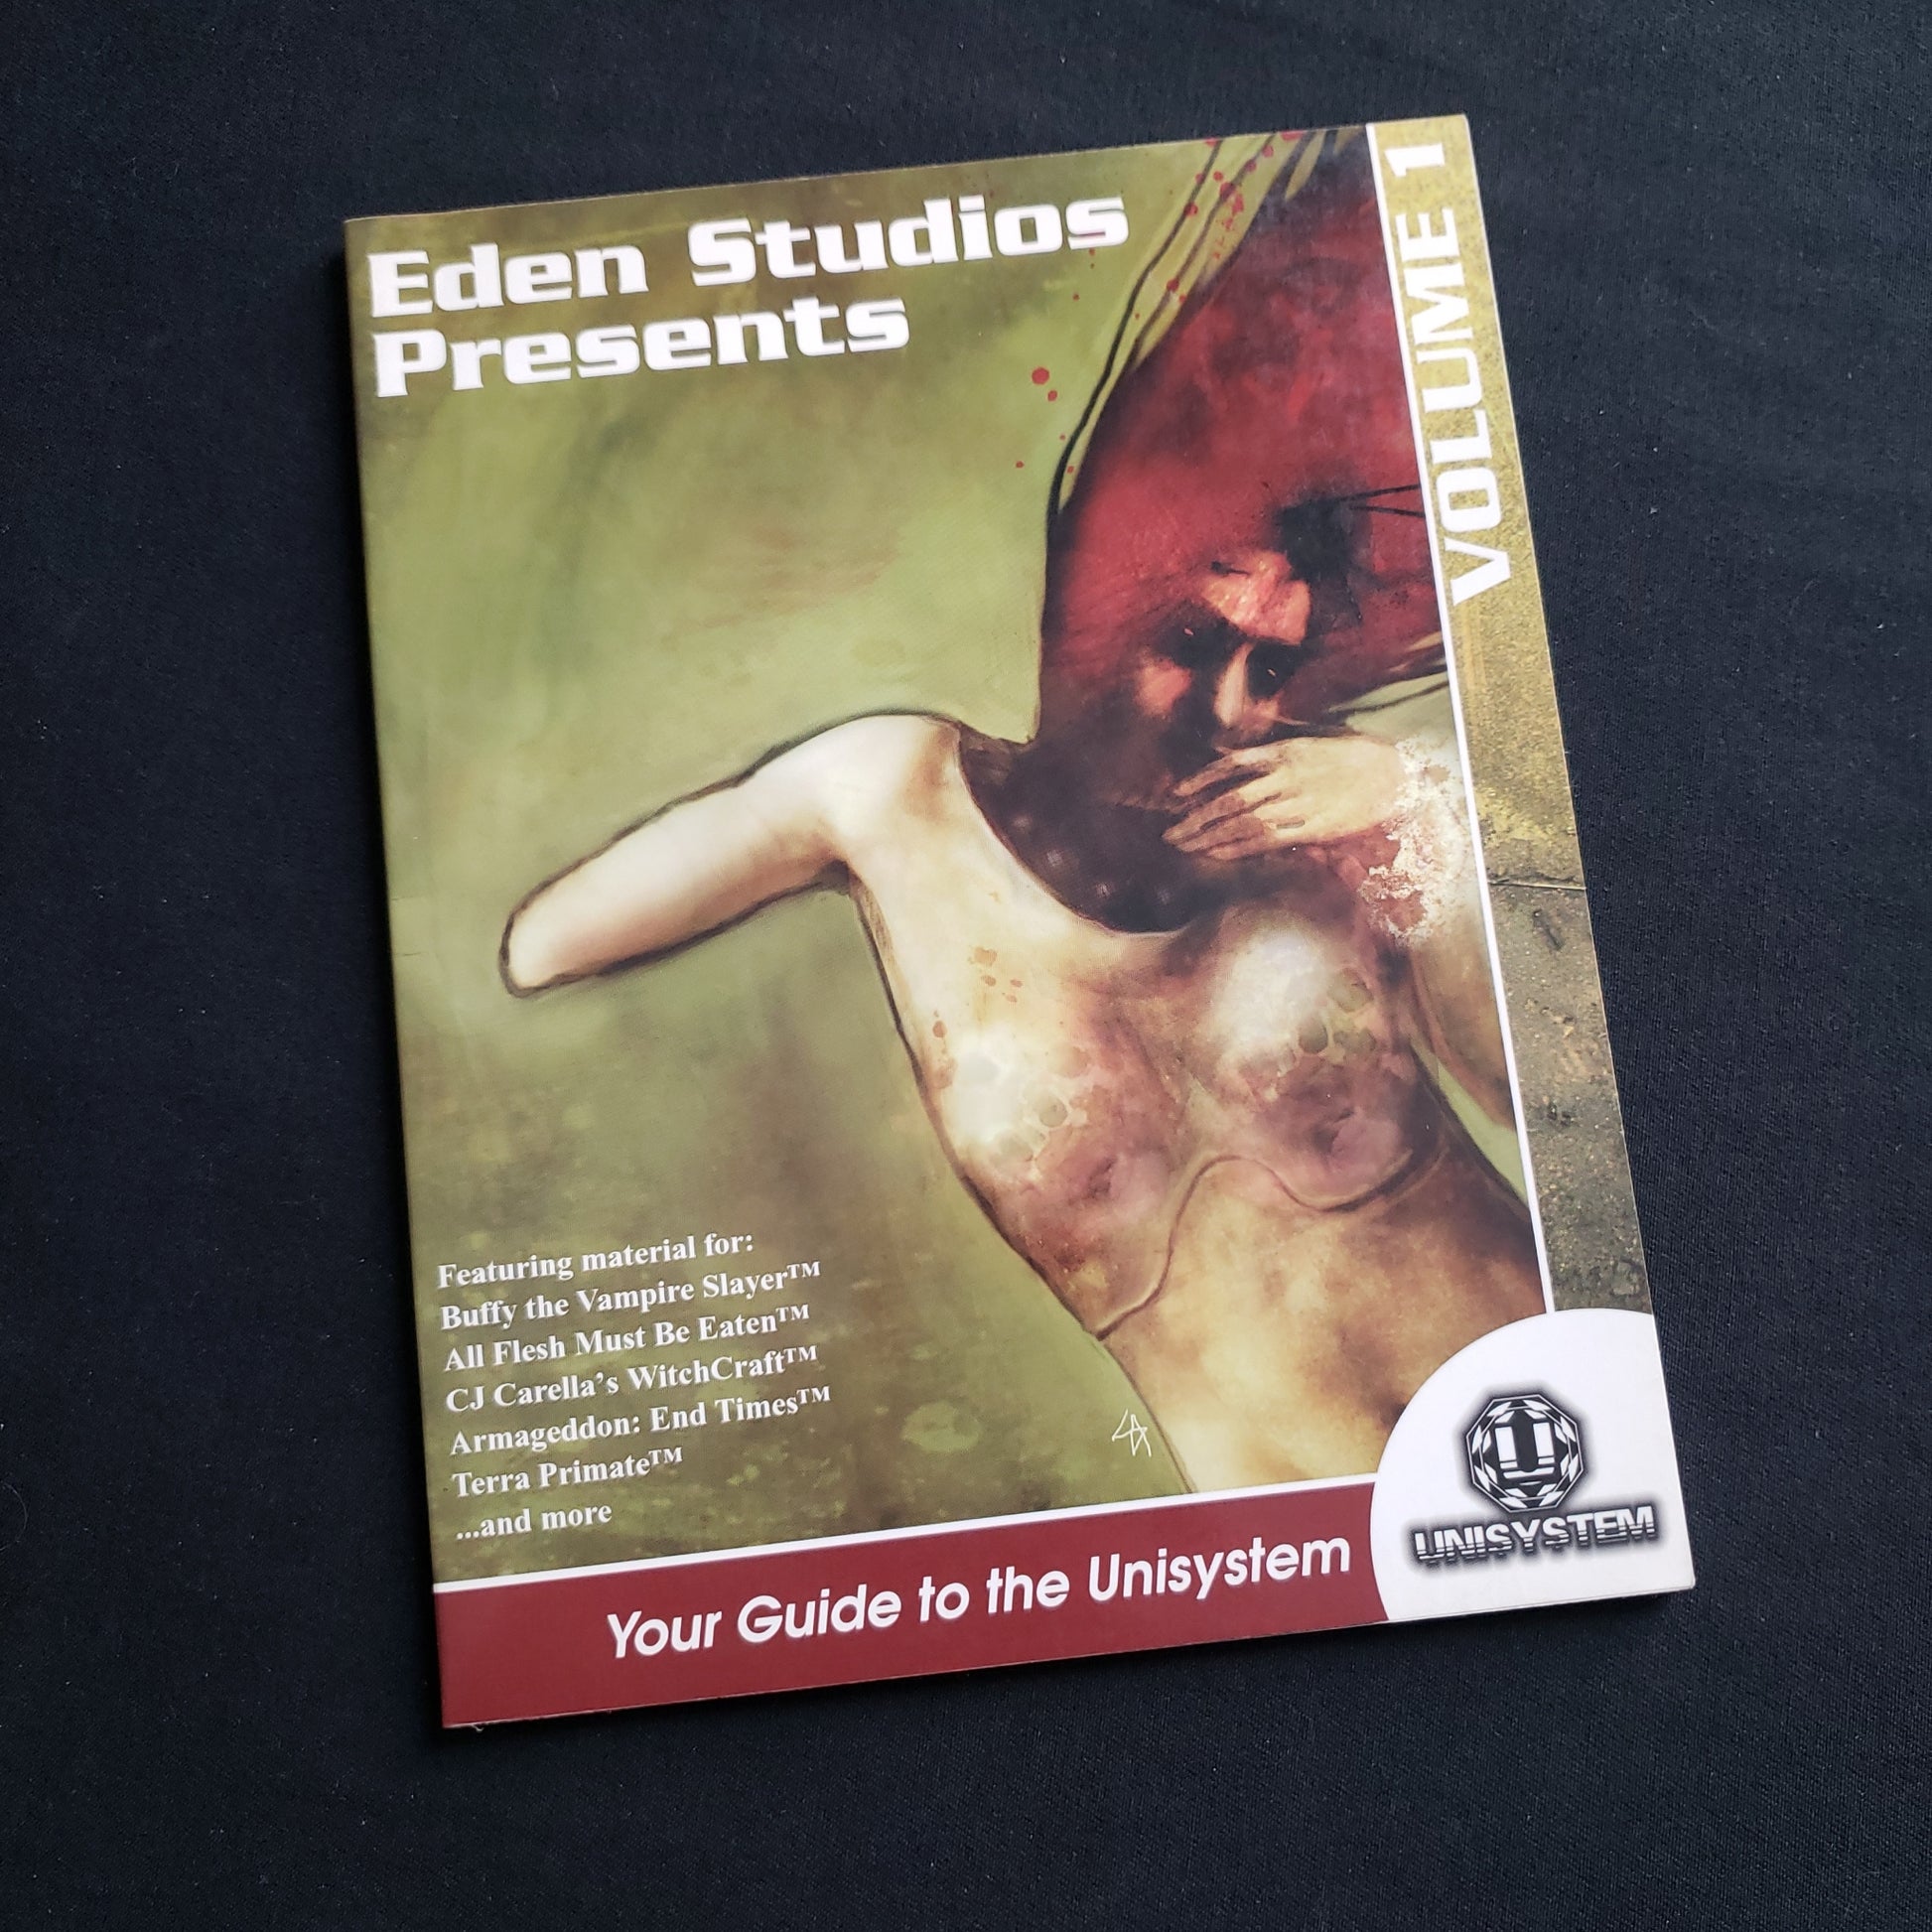 Image shows the front cover of the Eden Studios Presents: Your Guide to the Unisystem Vol 1 roleplaying game book